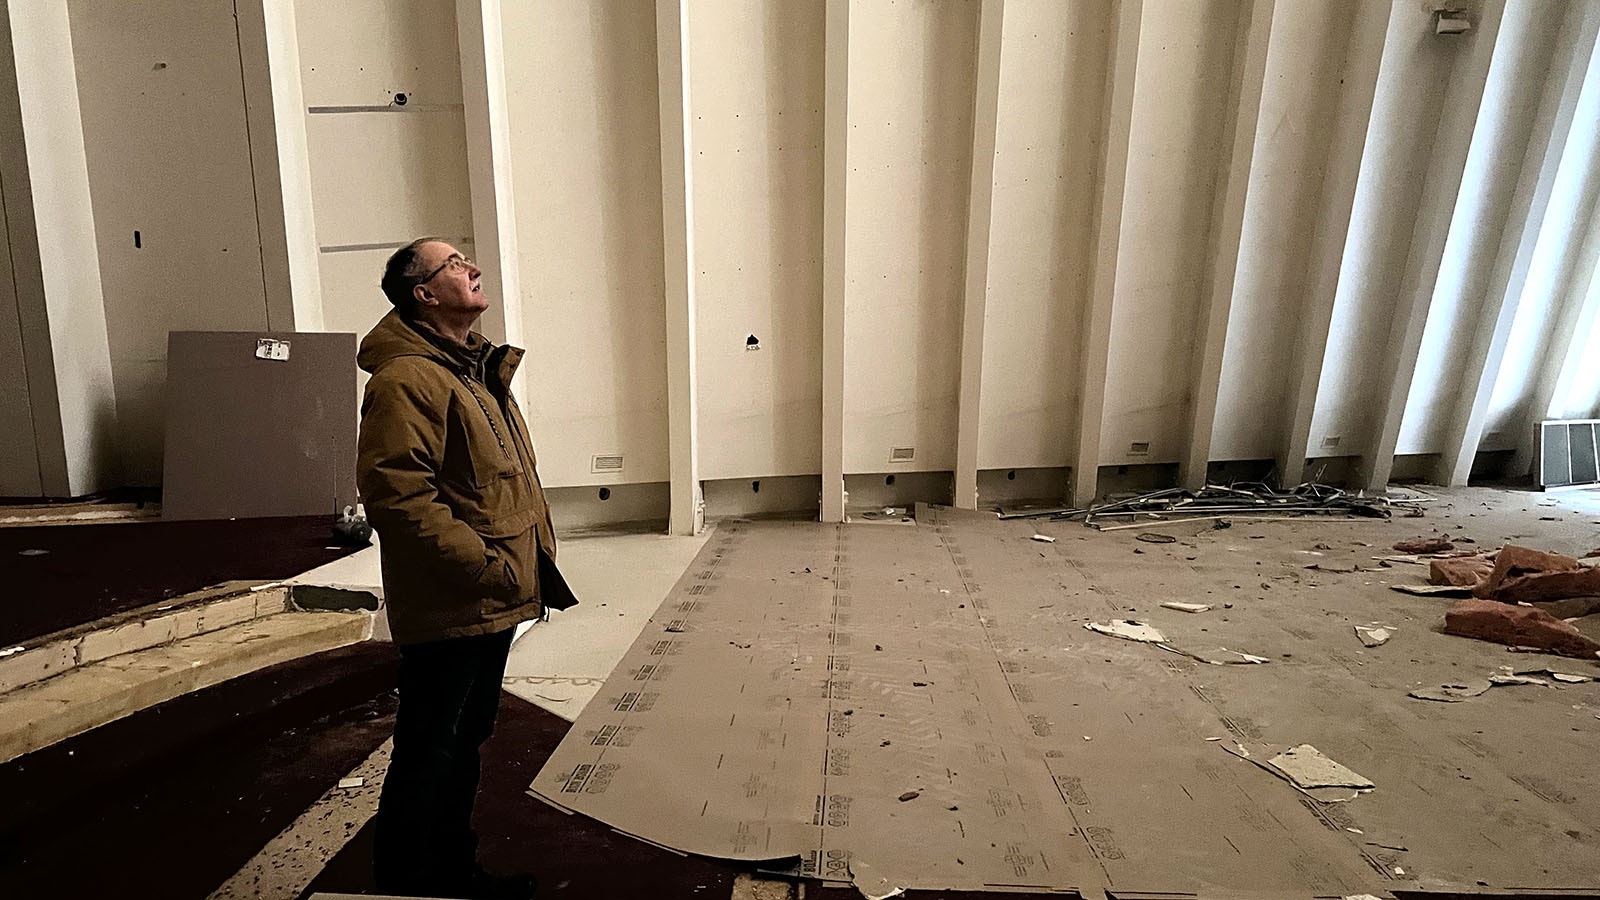 Pastor Eric Feuerstein stands inside the abandoned sanctuary of the First United Methodist Church in Laramie on Thursday. The unique, 90-foot-tall structure is set to be demolished soon.